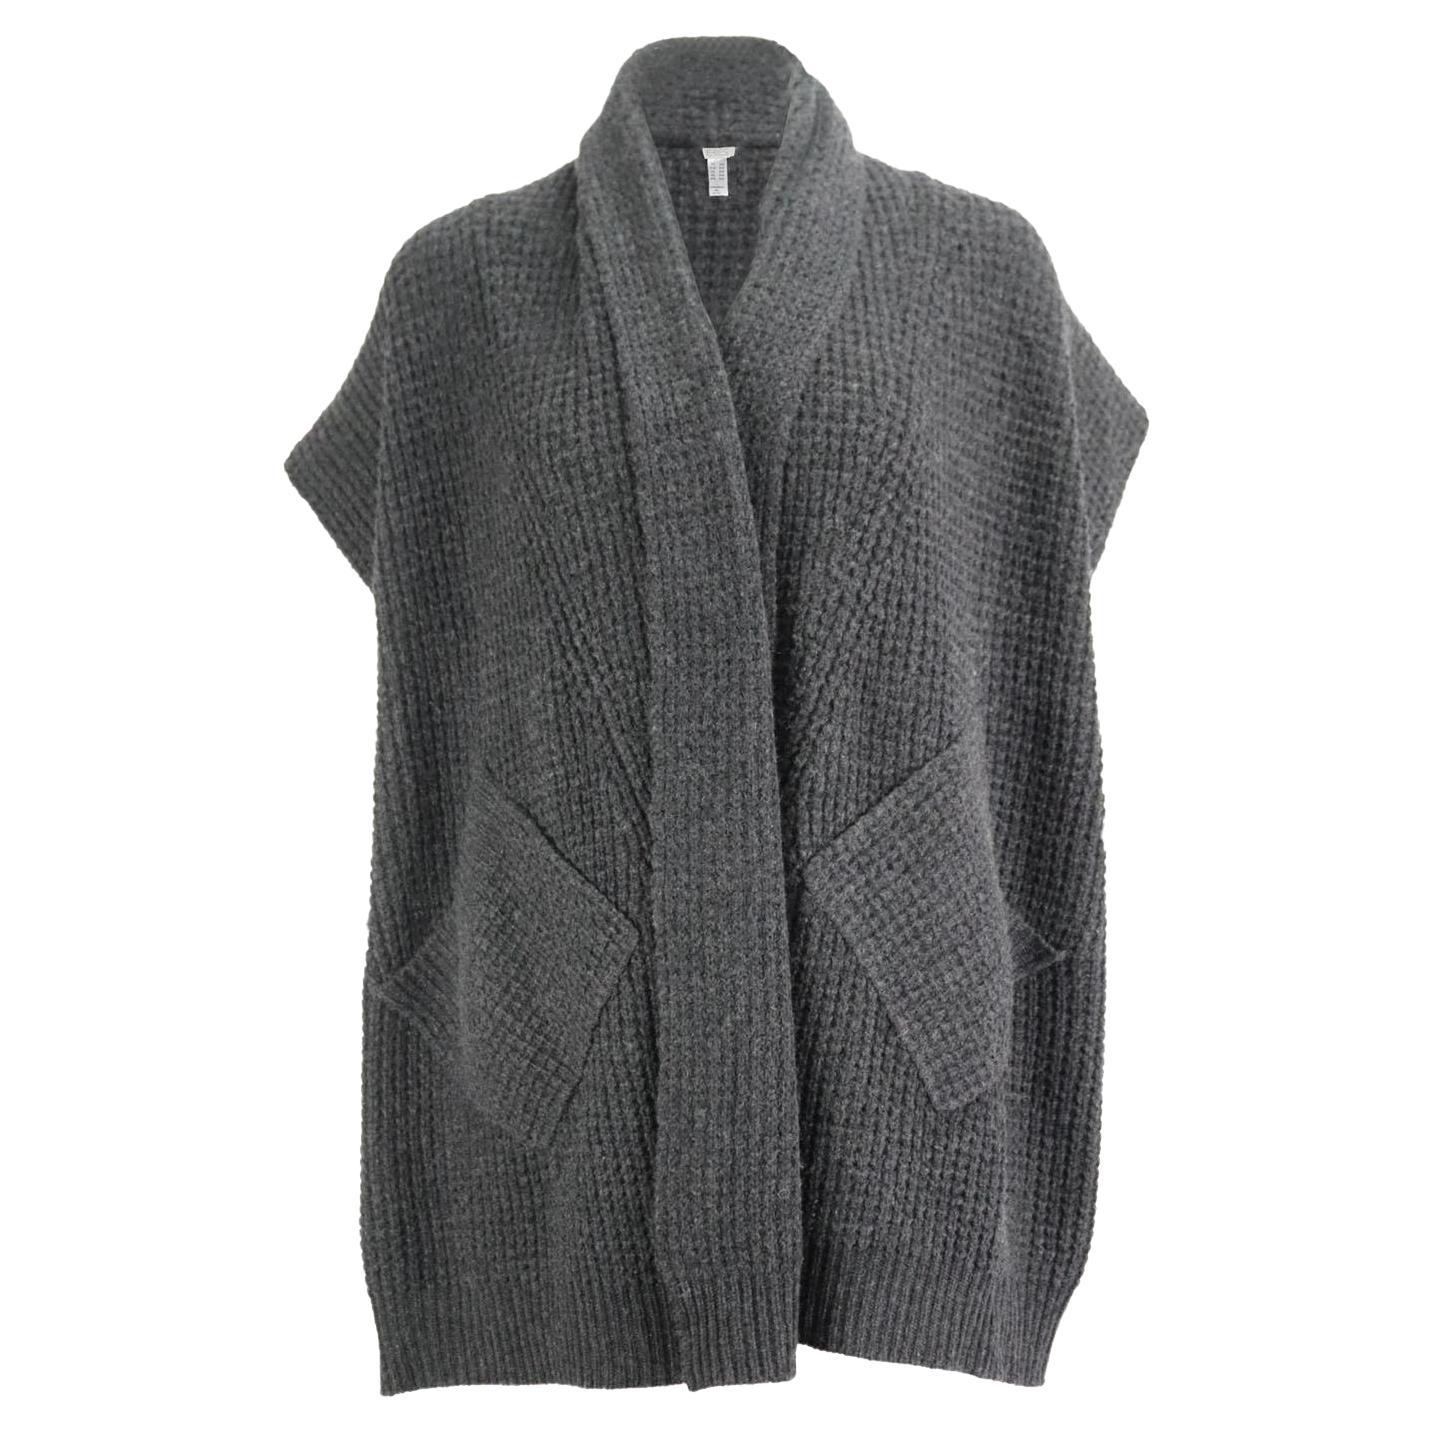 Eres Waffle Knit Wool And Cashmere Blend Cardigan Small/Medium